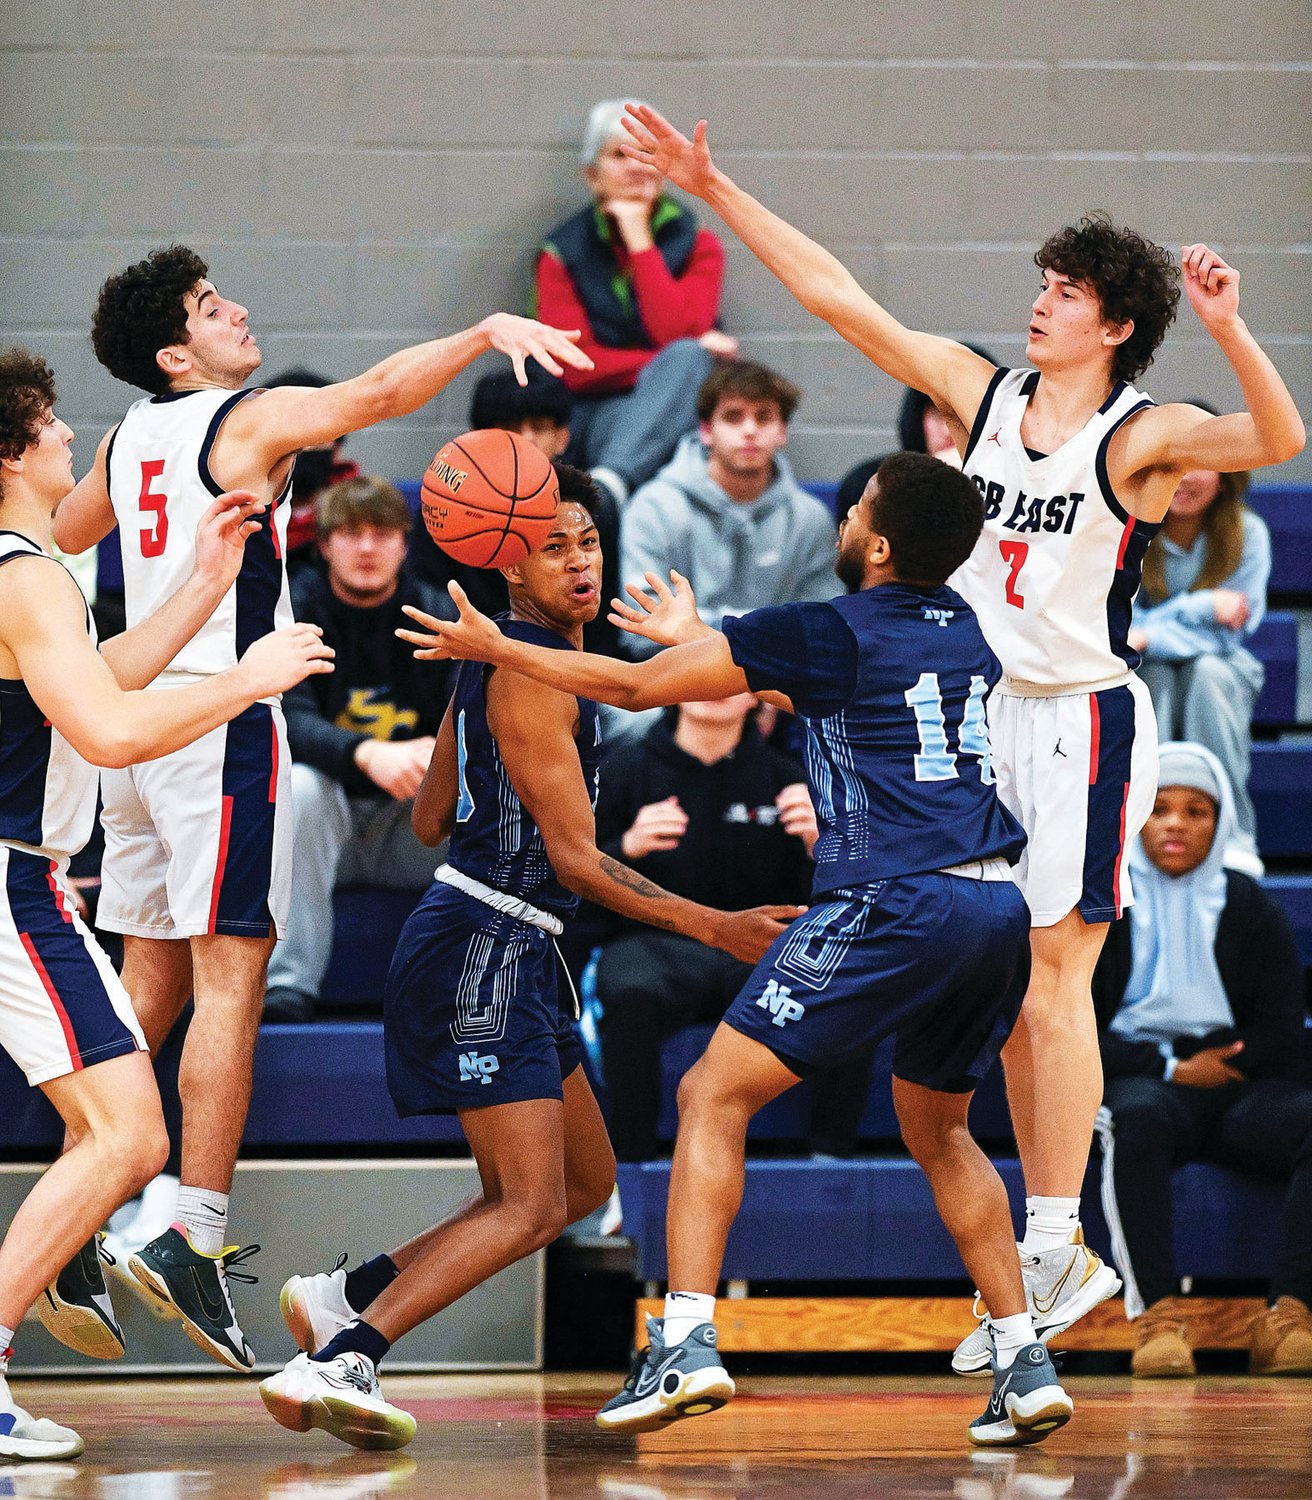 The CB East defense comes up huge late, stopping North Penn’s Joe Larkins’ shot attempt.